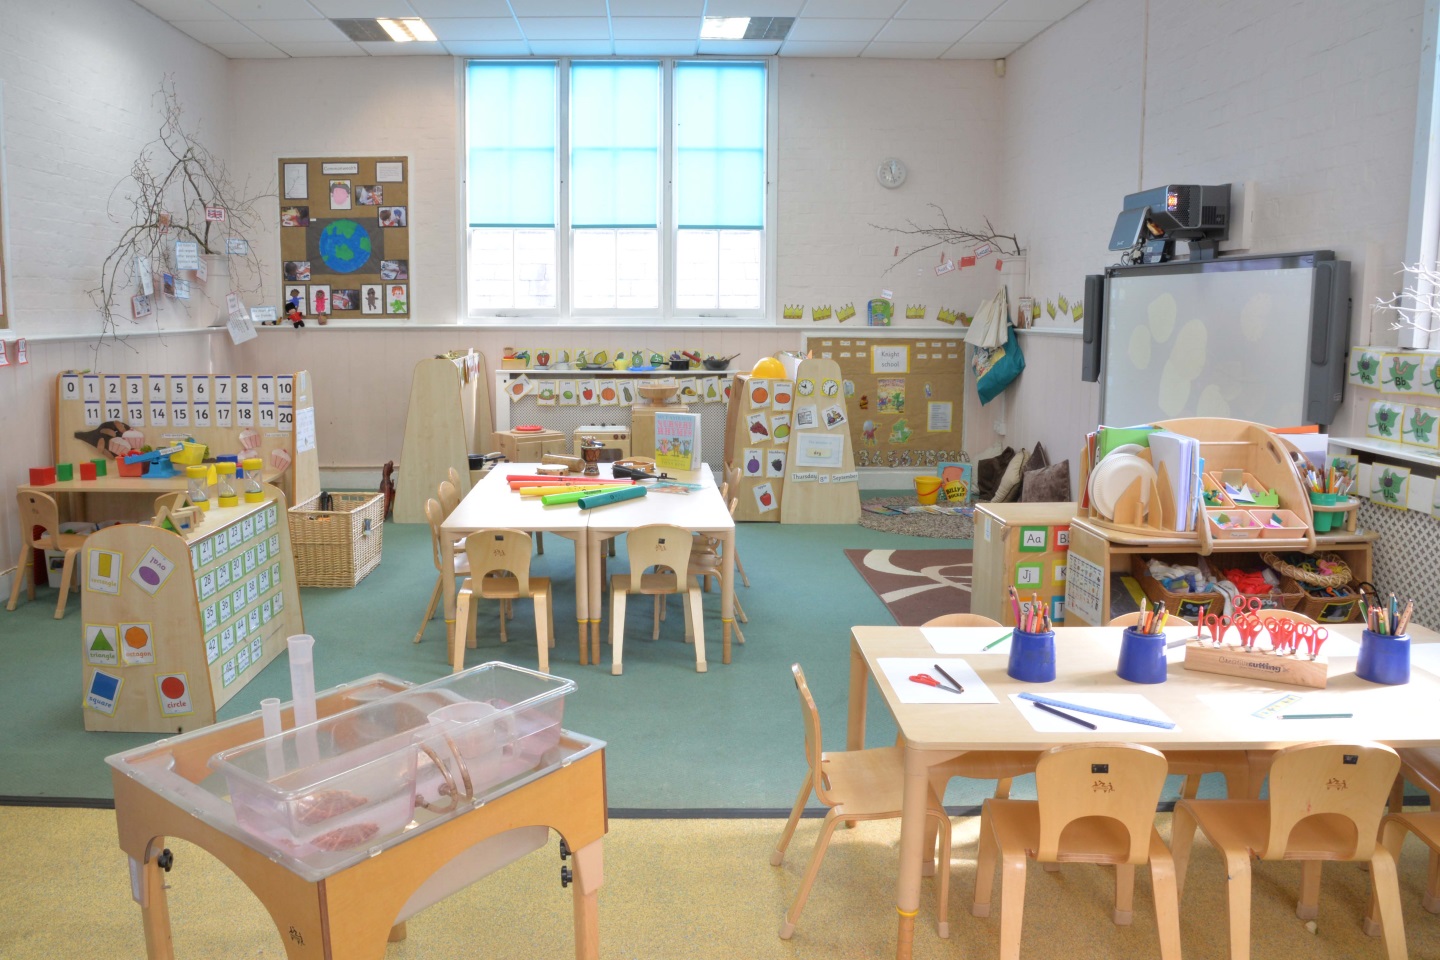 Asquith Woodlands Day Nursery and Preschool